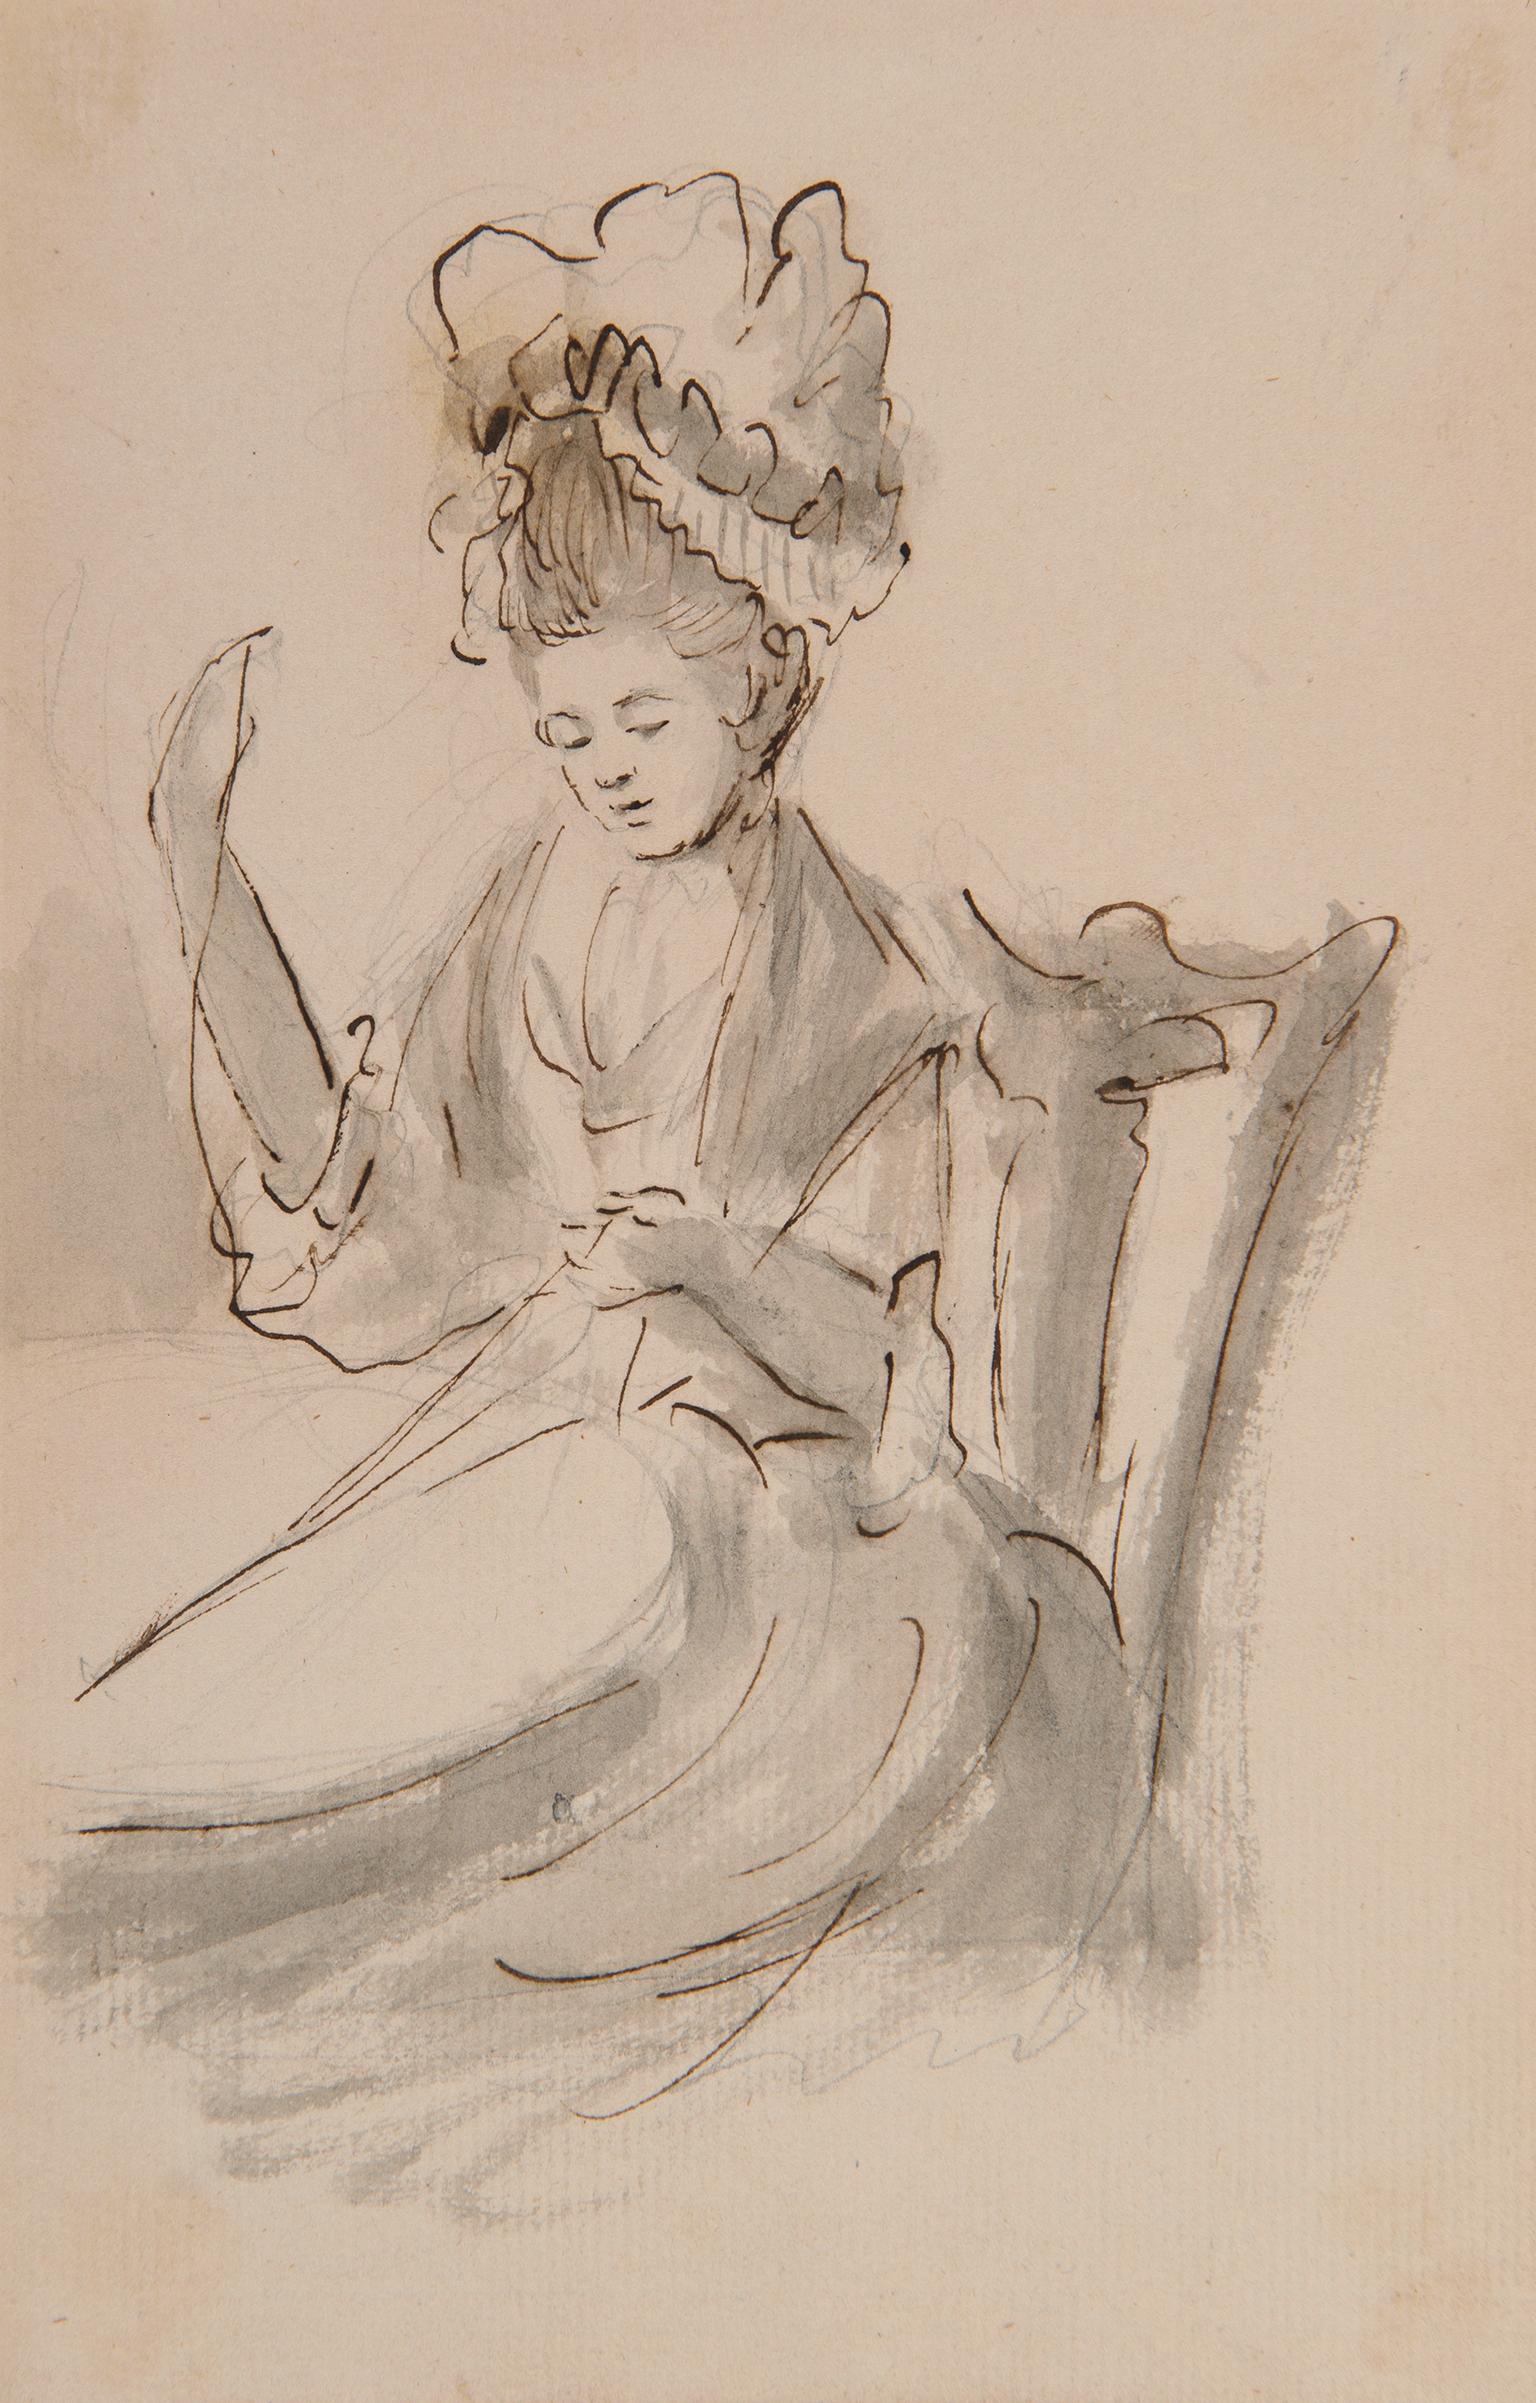 Unknown Figurative Art - A lady wearing a mob cap sewing - 18th century figurative ink drawing